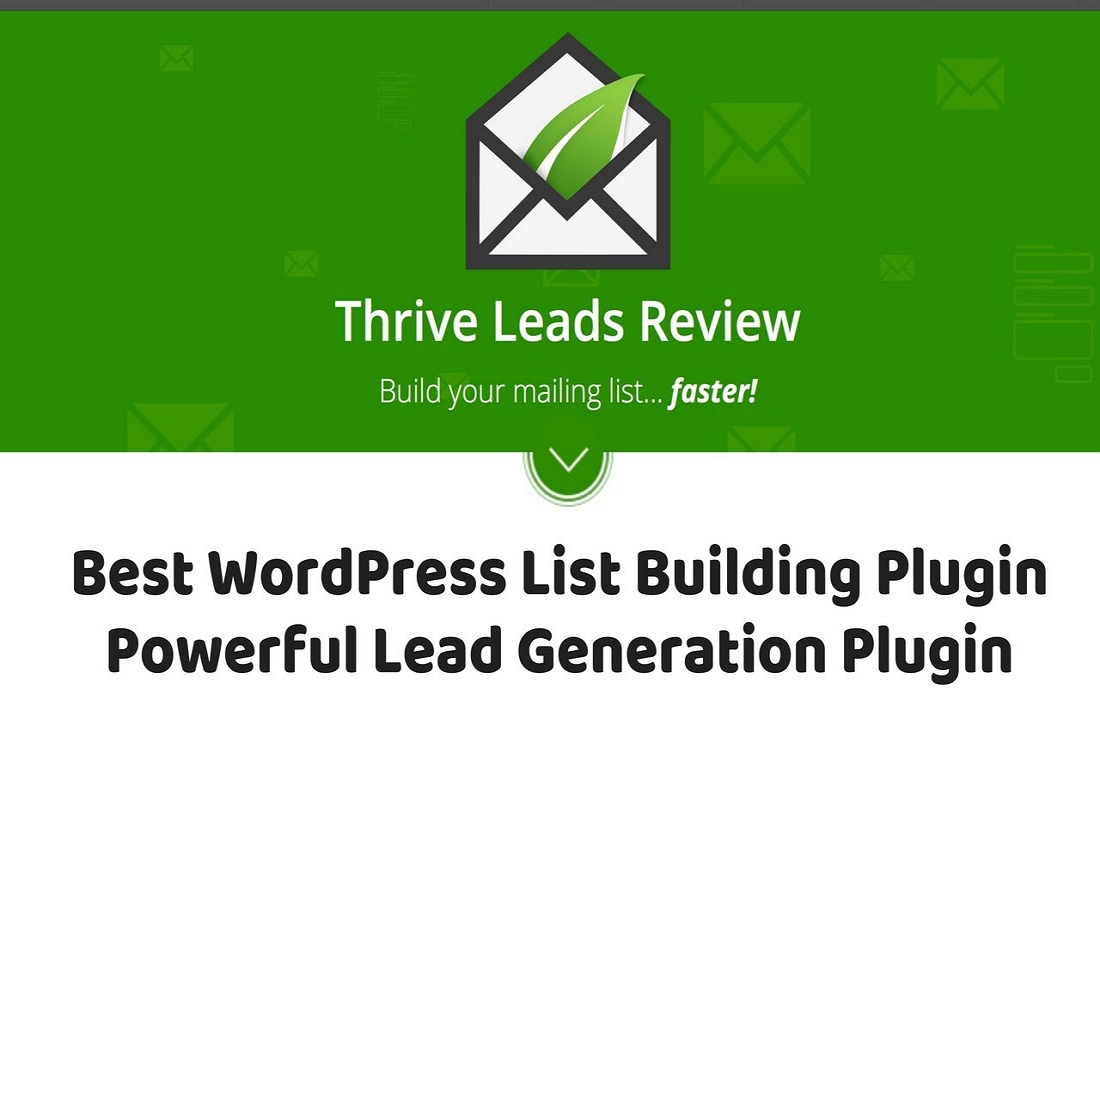 Thrive Leads: The Ultimate List Building Plugin for WordPress preview image.